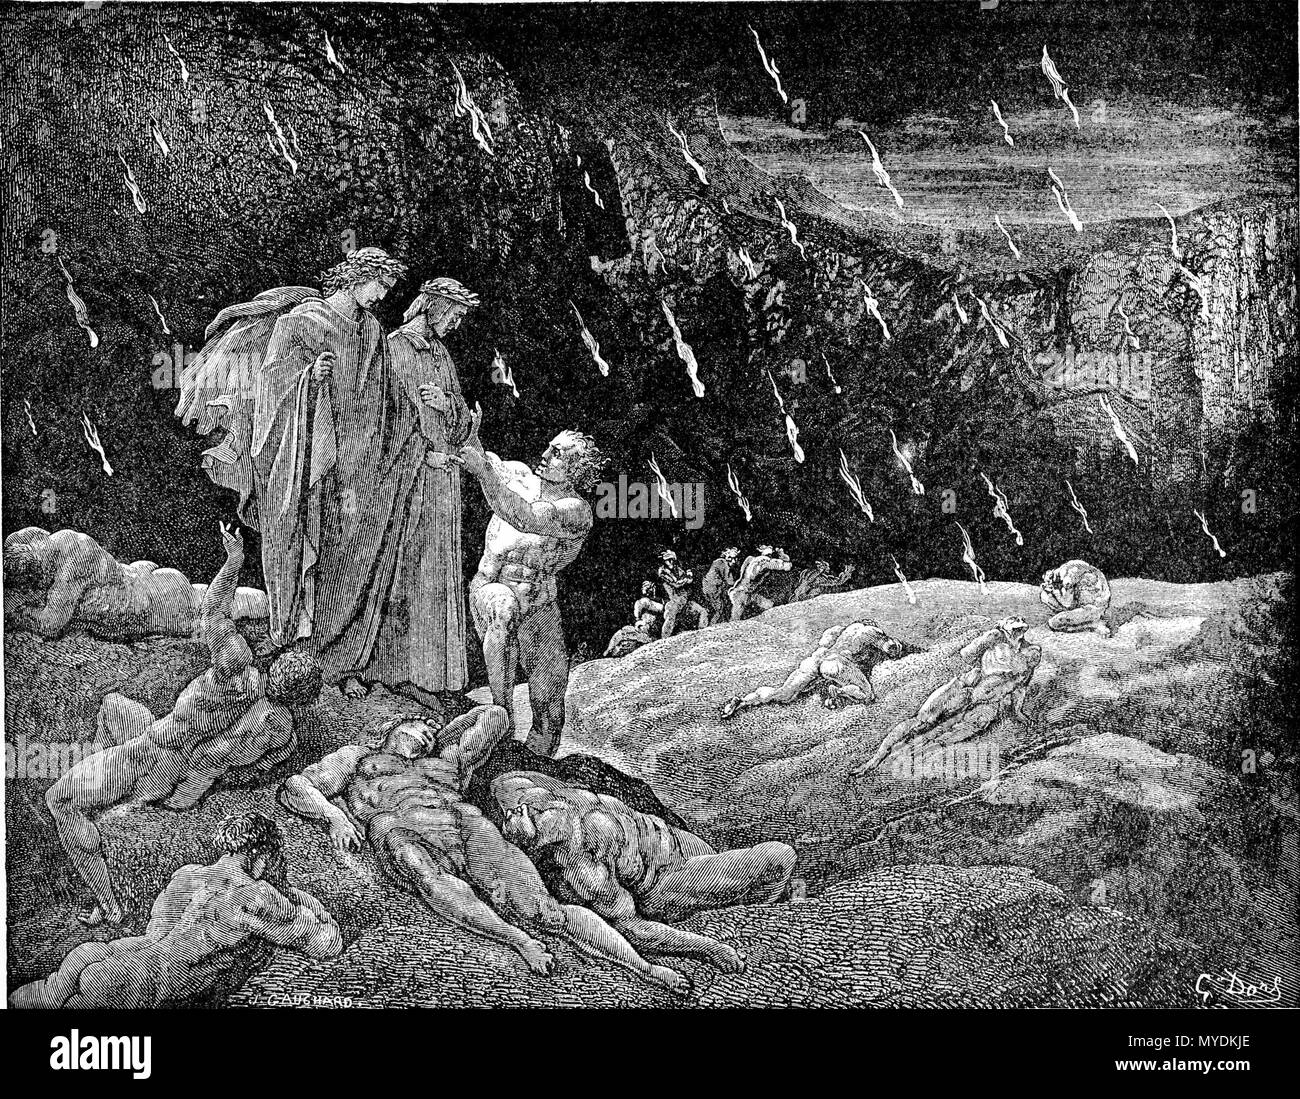 . High resolution scan of engraving by Gustave Doré illustrating Canto XV of Divine Comedy, Inferno, by Dante Alighieri. Caption: Brunetto Latini accosts Dante . 30 January 2008. scanned, post-processed, and uploaded by Karl Hahn 150 DVinfernoBrunettoLatiniAccostsDante m Stock Photo